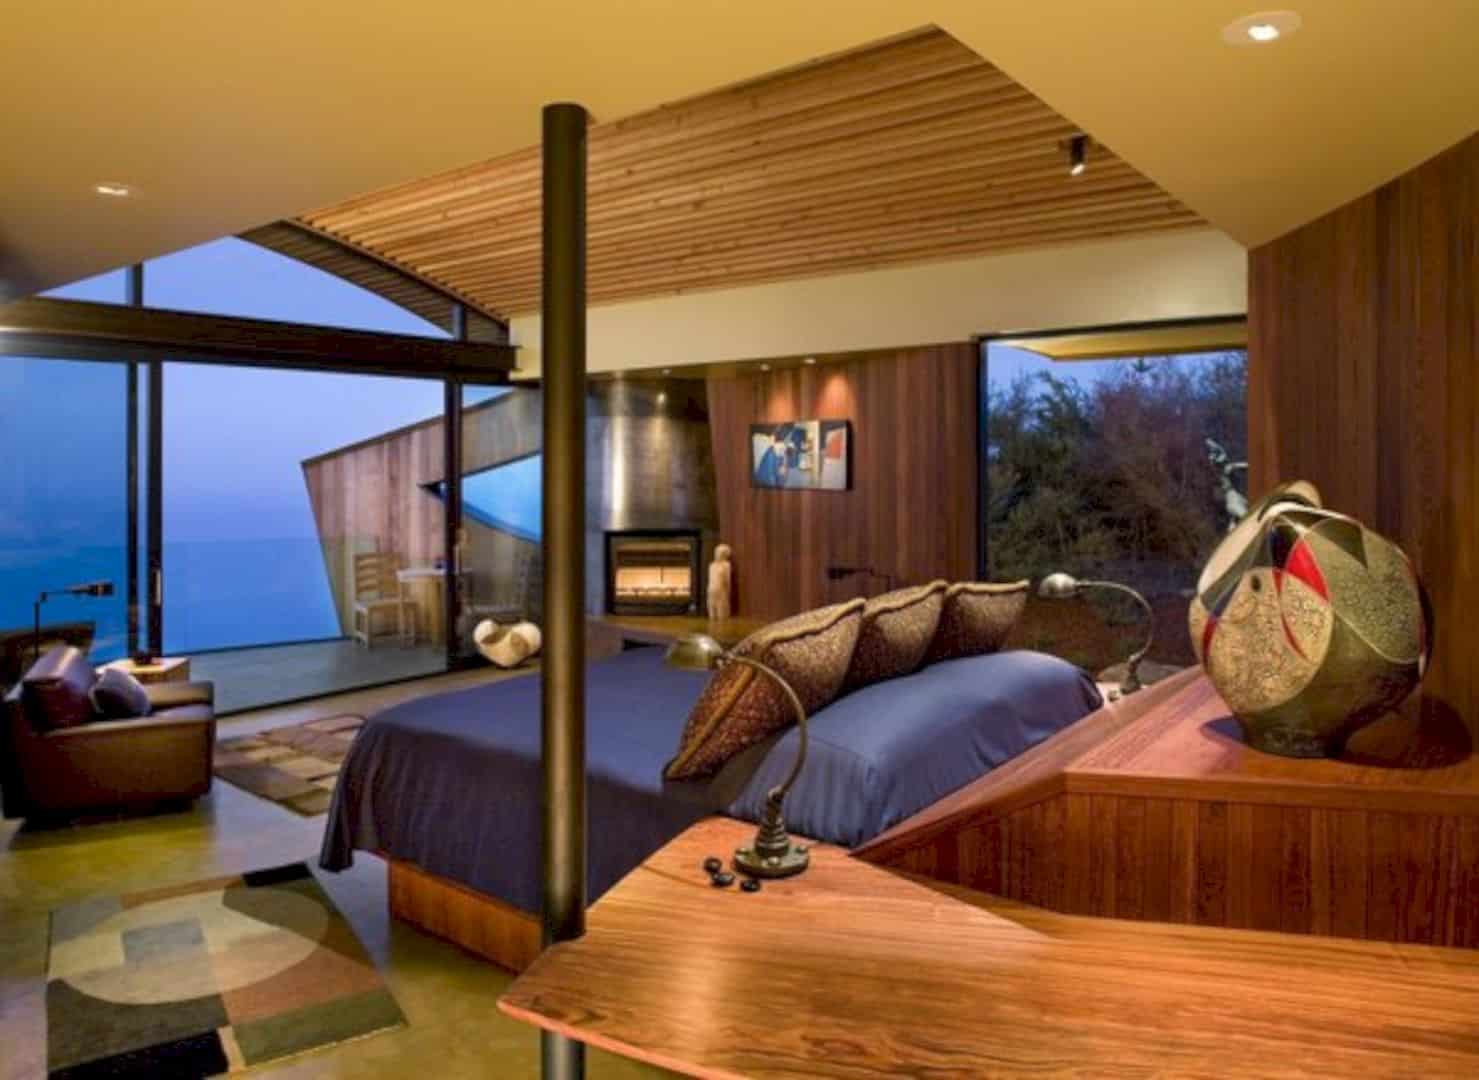 The Post Ranch Inn A Rustic Eco Luxury Hotel Overlooks The Pacific 5